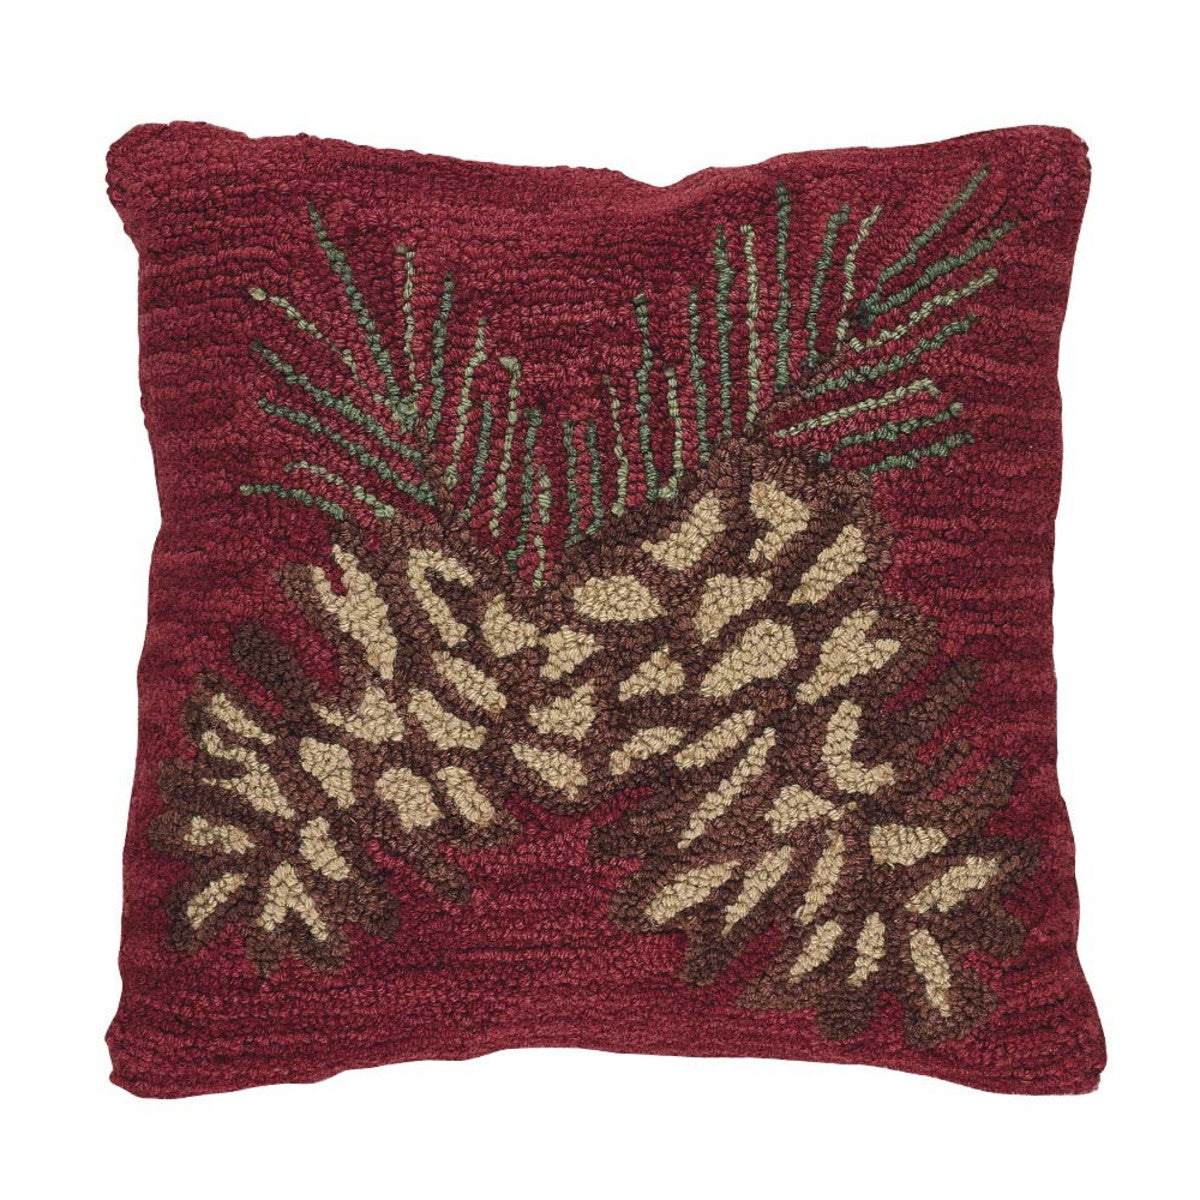 Pinecone Hooked Pillow Polyester Fill 18"x18" - Park Designs